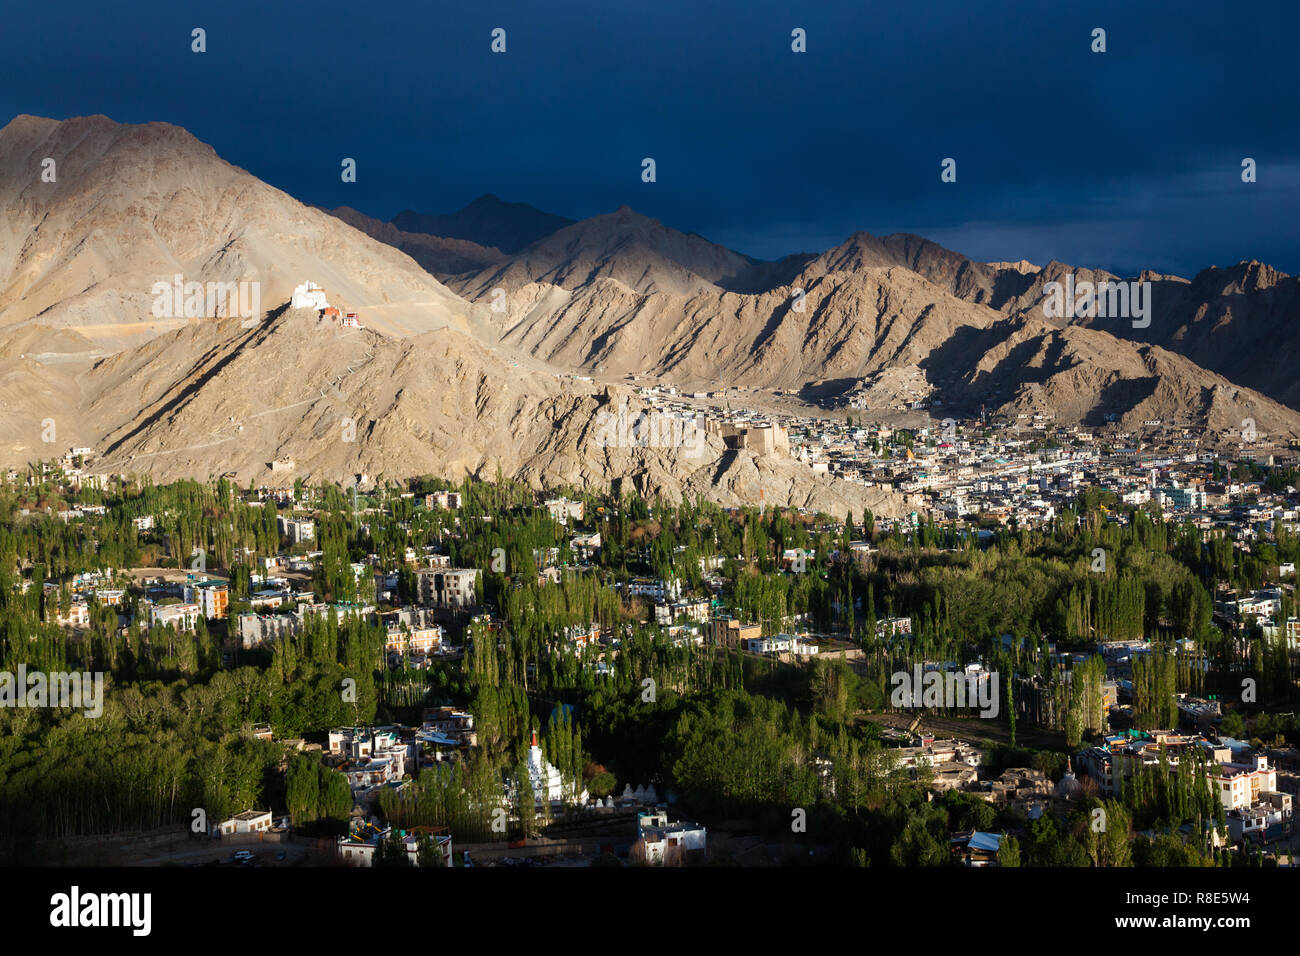 Stunning afternoon scenery of Leh and its surroundings seen from area of Shanti Stupa, Ladakh, Jammu and Kashmir, India Stock Photo